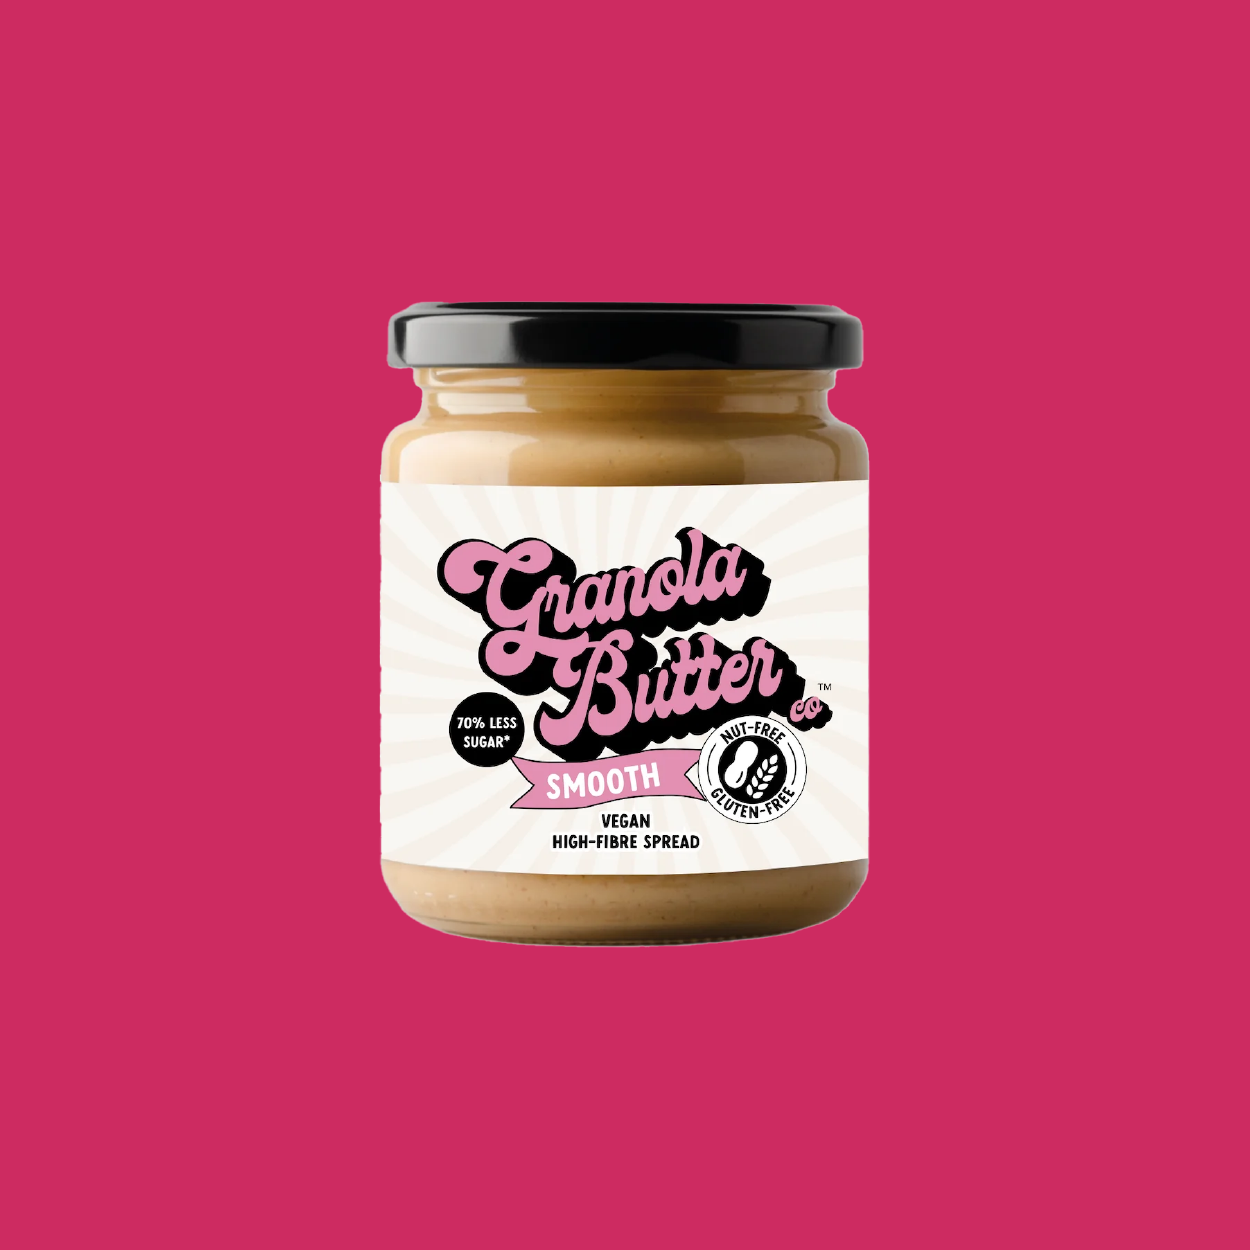 Our Smooth Granola Butter jar, with a pink logo, gluten free and nut free icons visible on the environmentally friendly sweet spread packaging.  